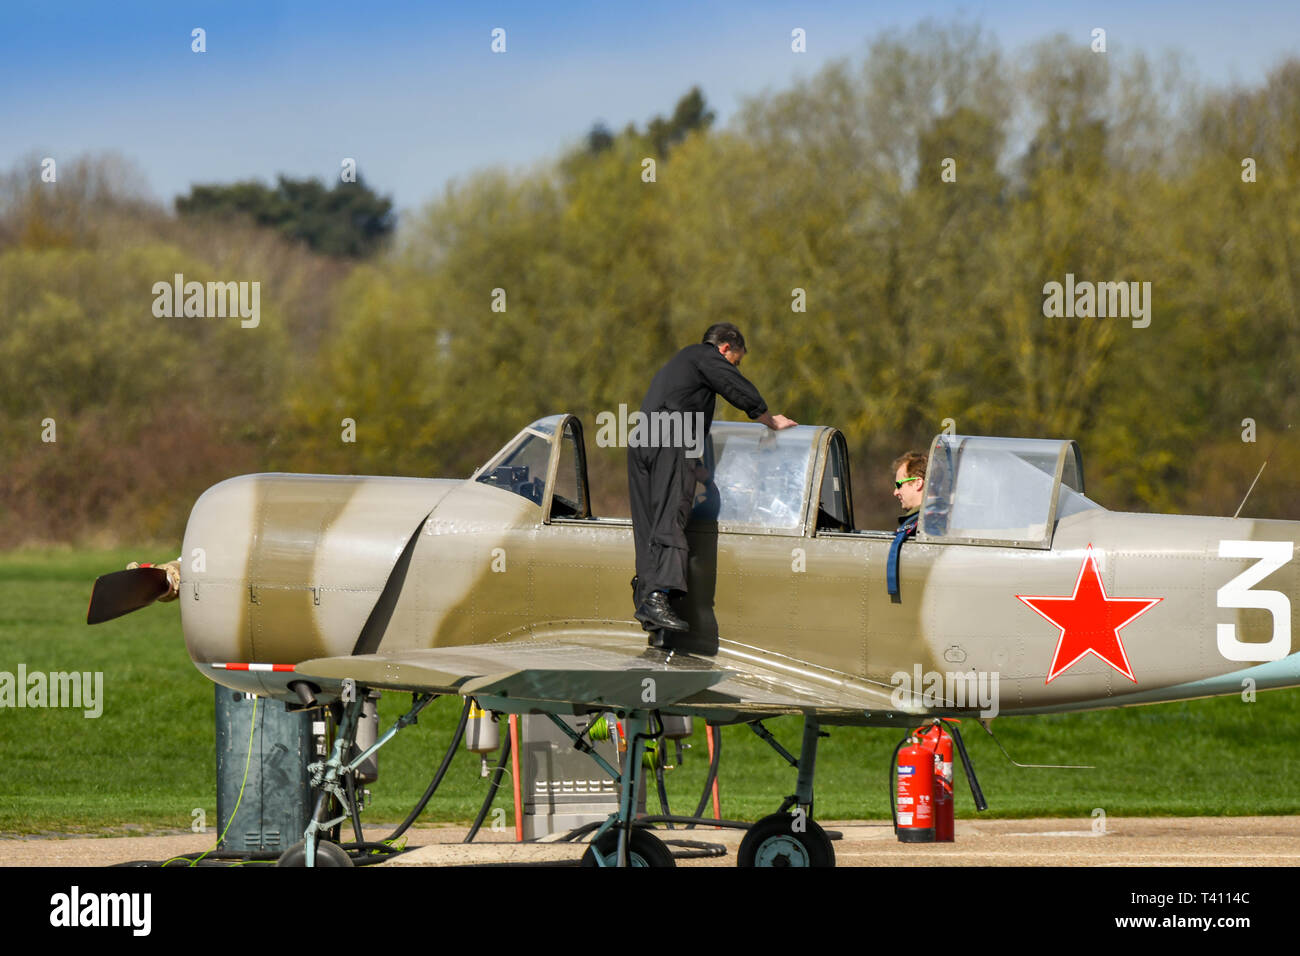 WHITE WALTHAM, ENGLAND - MARCH 2019: Person standing on the wing of a Yakolev Yak light aircraft at White Waltham airfield. Stock Photo